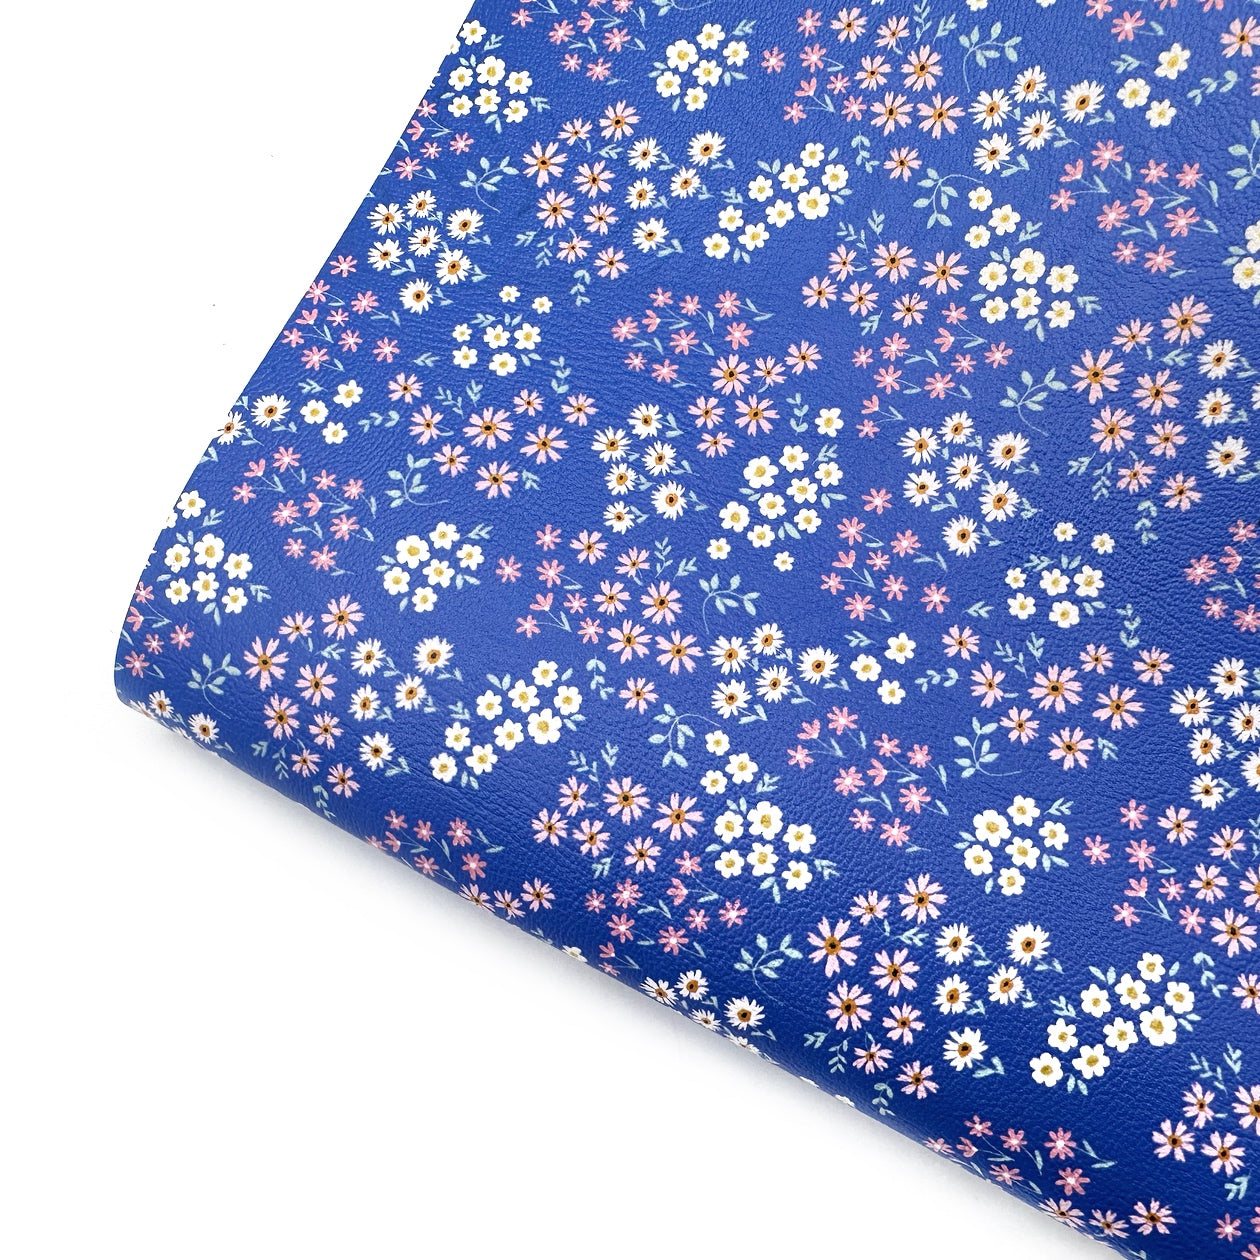 Ditsy Floral Betty Blue Premium Faux Leather Fabric Sheets